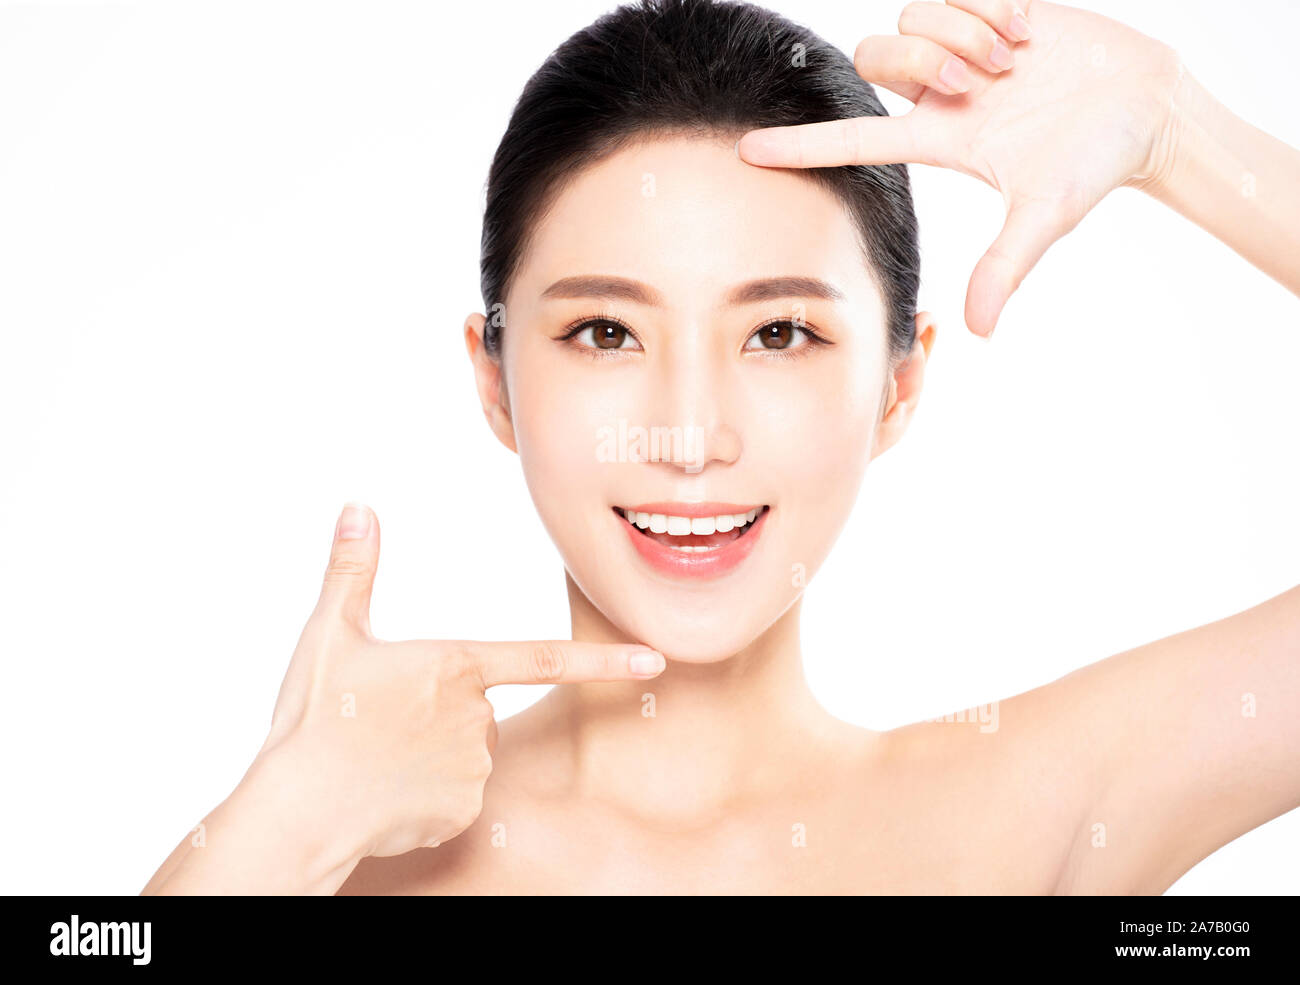 Closeup of Smiling beauty  Making Frame Gesture Stock Photo